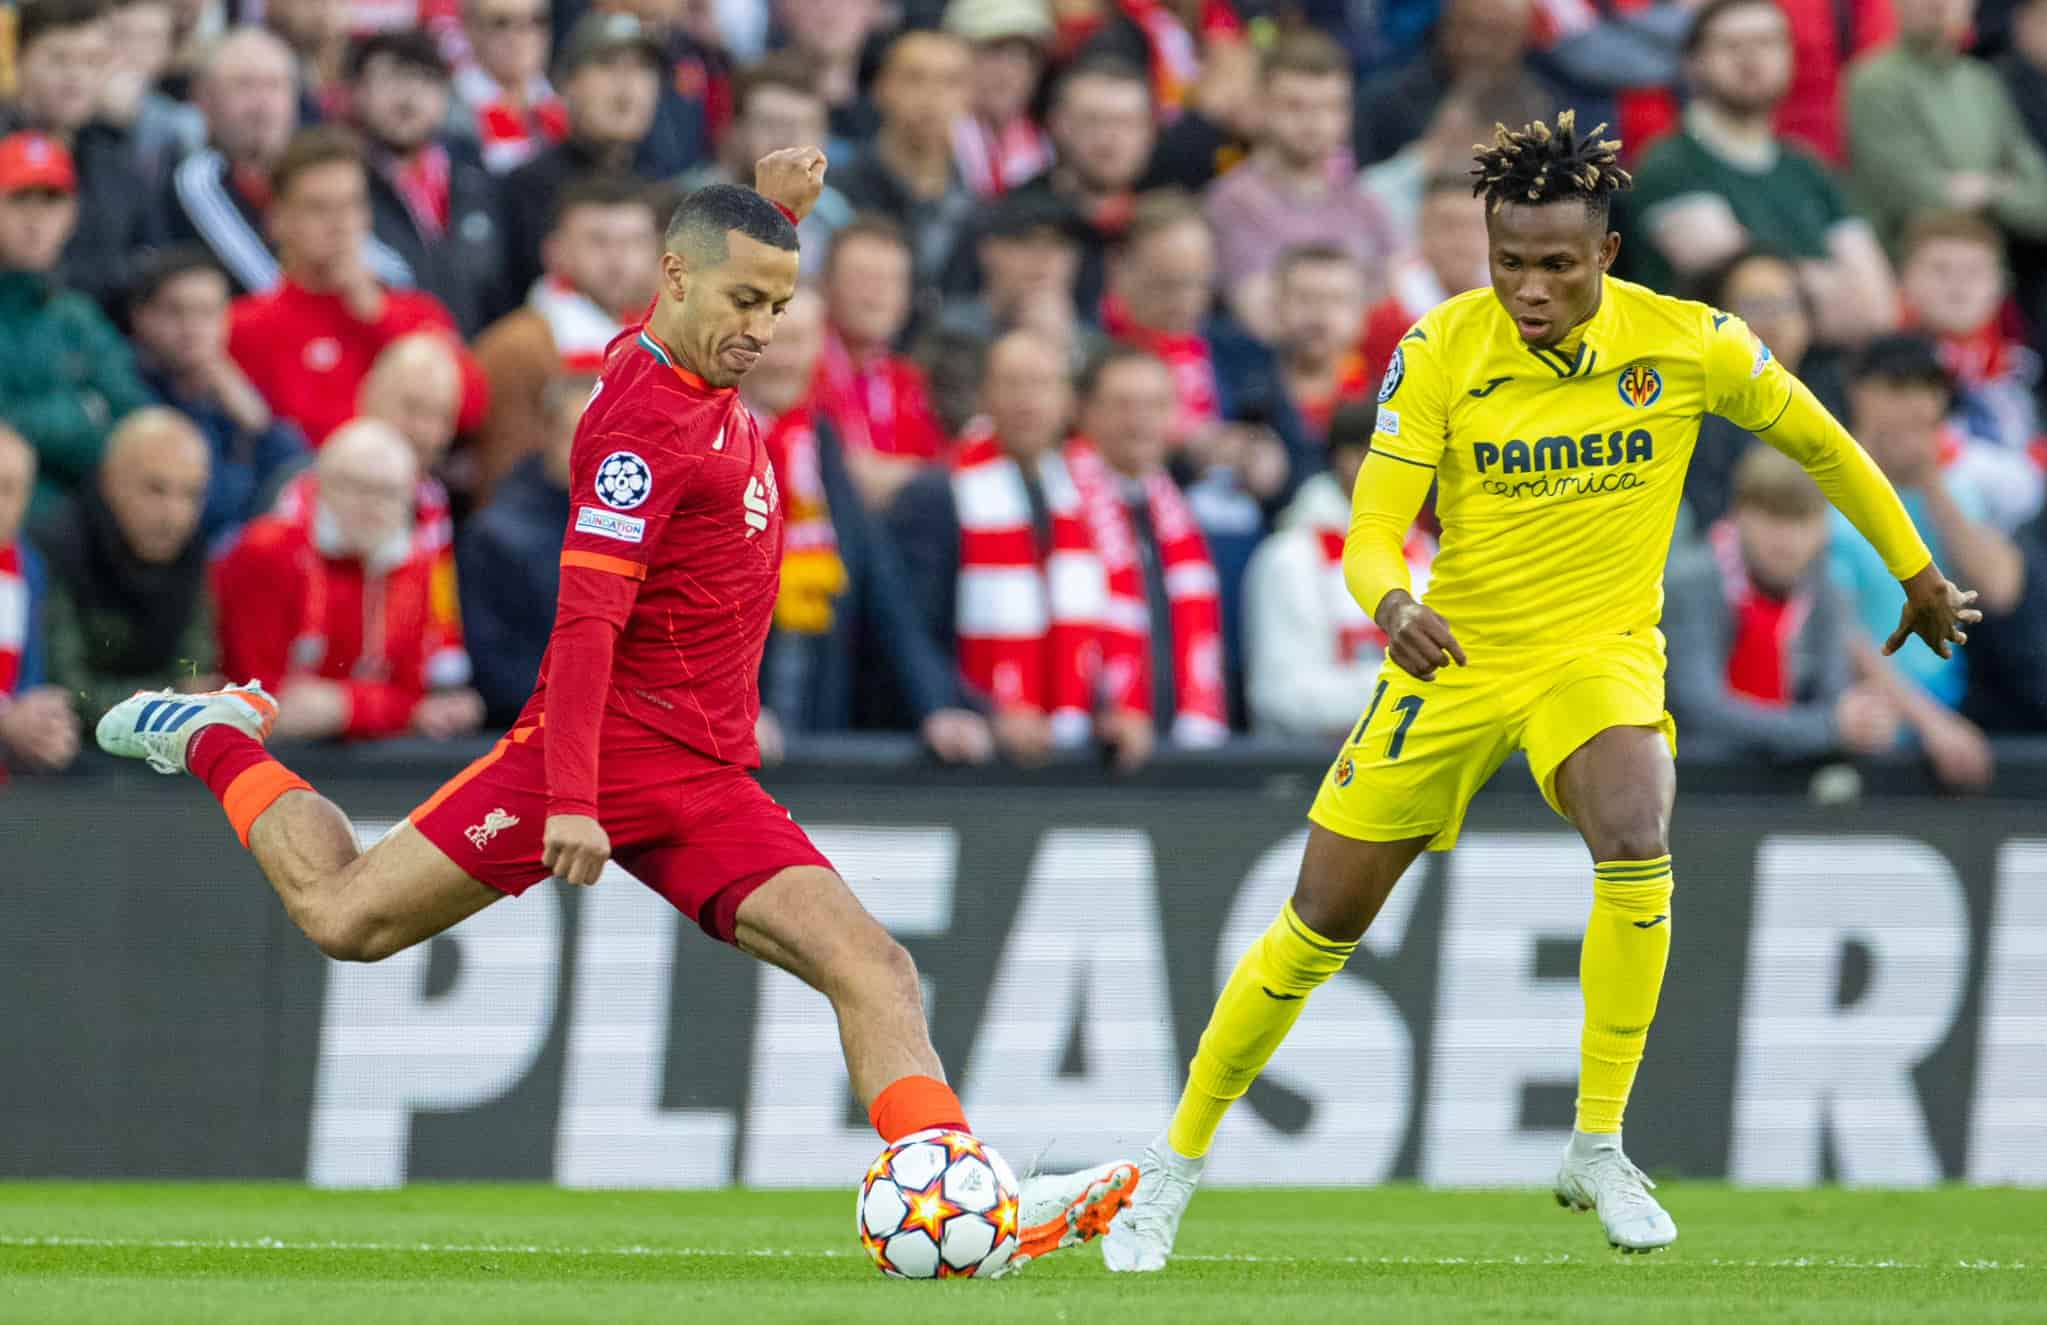 Liverpool 2-0 Villarreal Chukwueze not influential for the Yellow Submarine